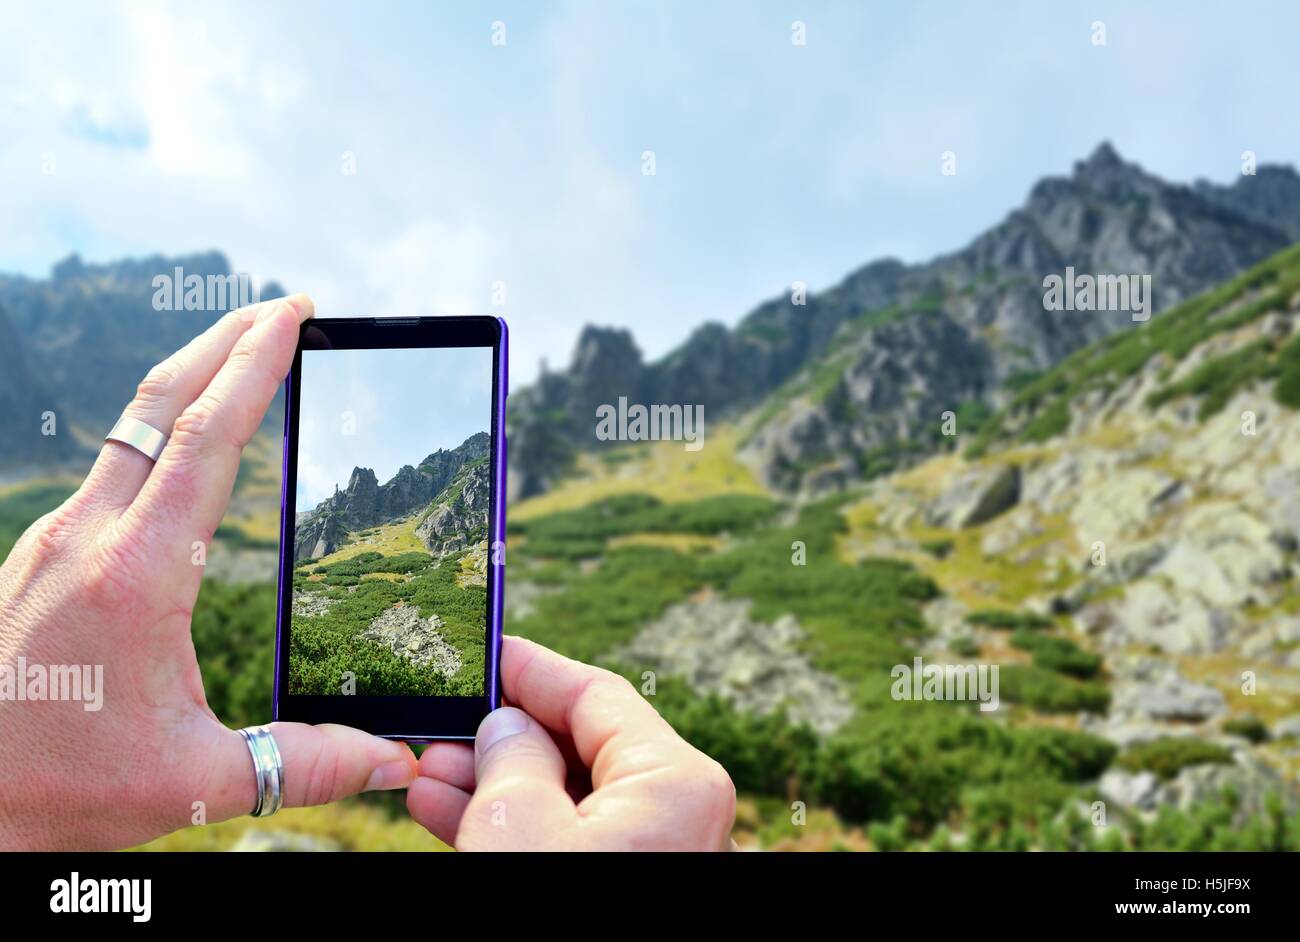 View over the mobile phone display during taking a picture of landscape in nature. Holding the mobile phone in hands and taking Stock Photo